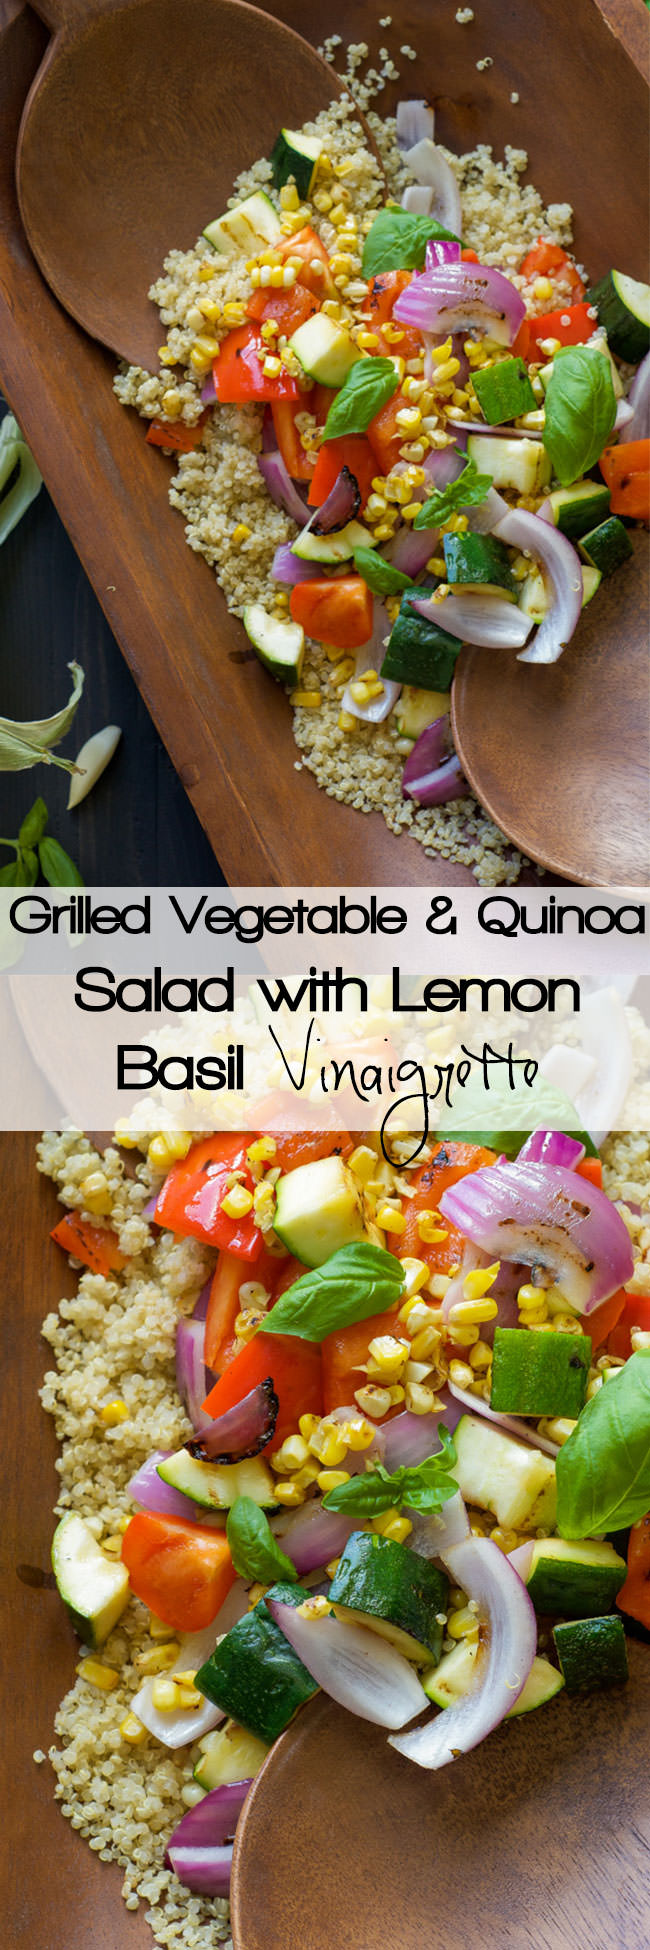 A nutrient and superfood dense salad - this Grilled Summer Vegetable Quinoa Salad is bursting with flavors and drizzled with a light, Lemon Basil Vinaigrette!